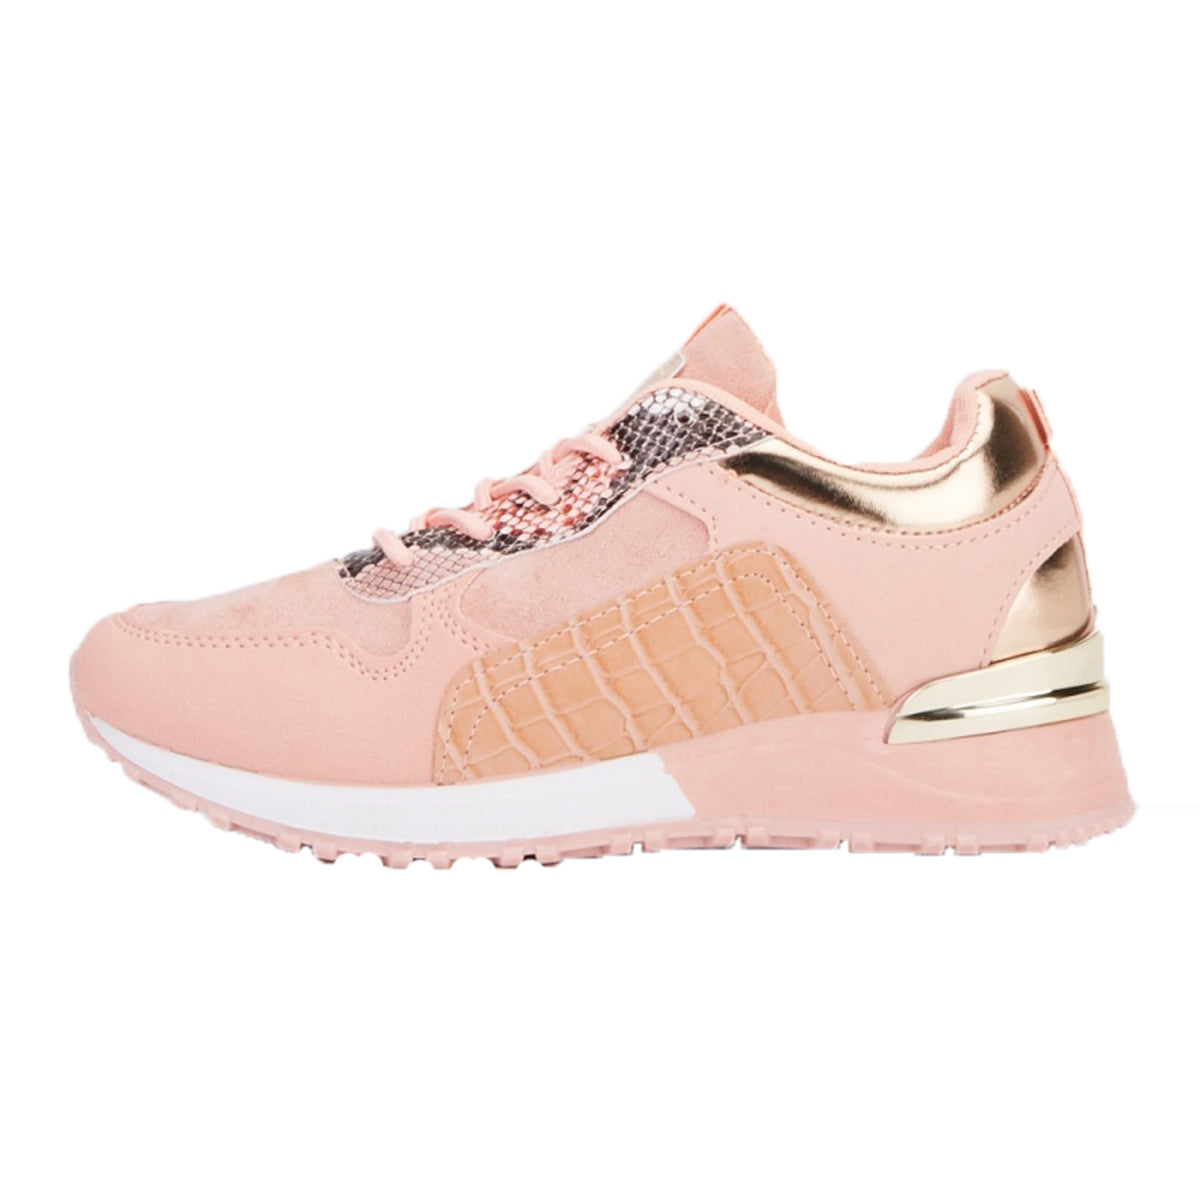 Pink / gold lace up trainers with croc effect